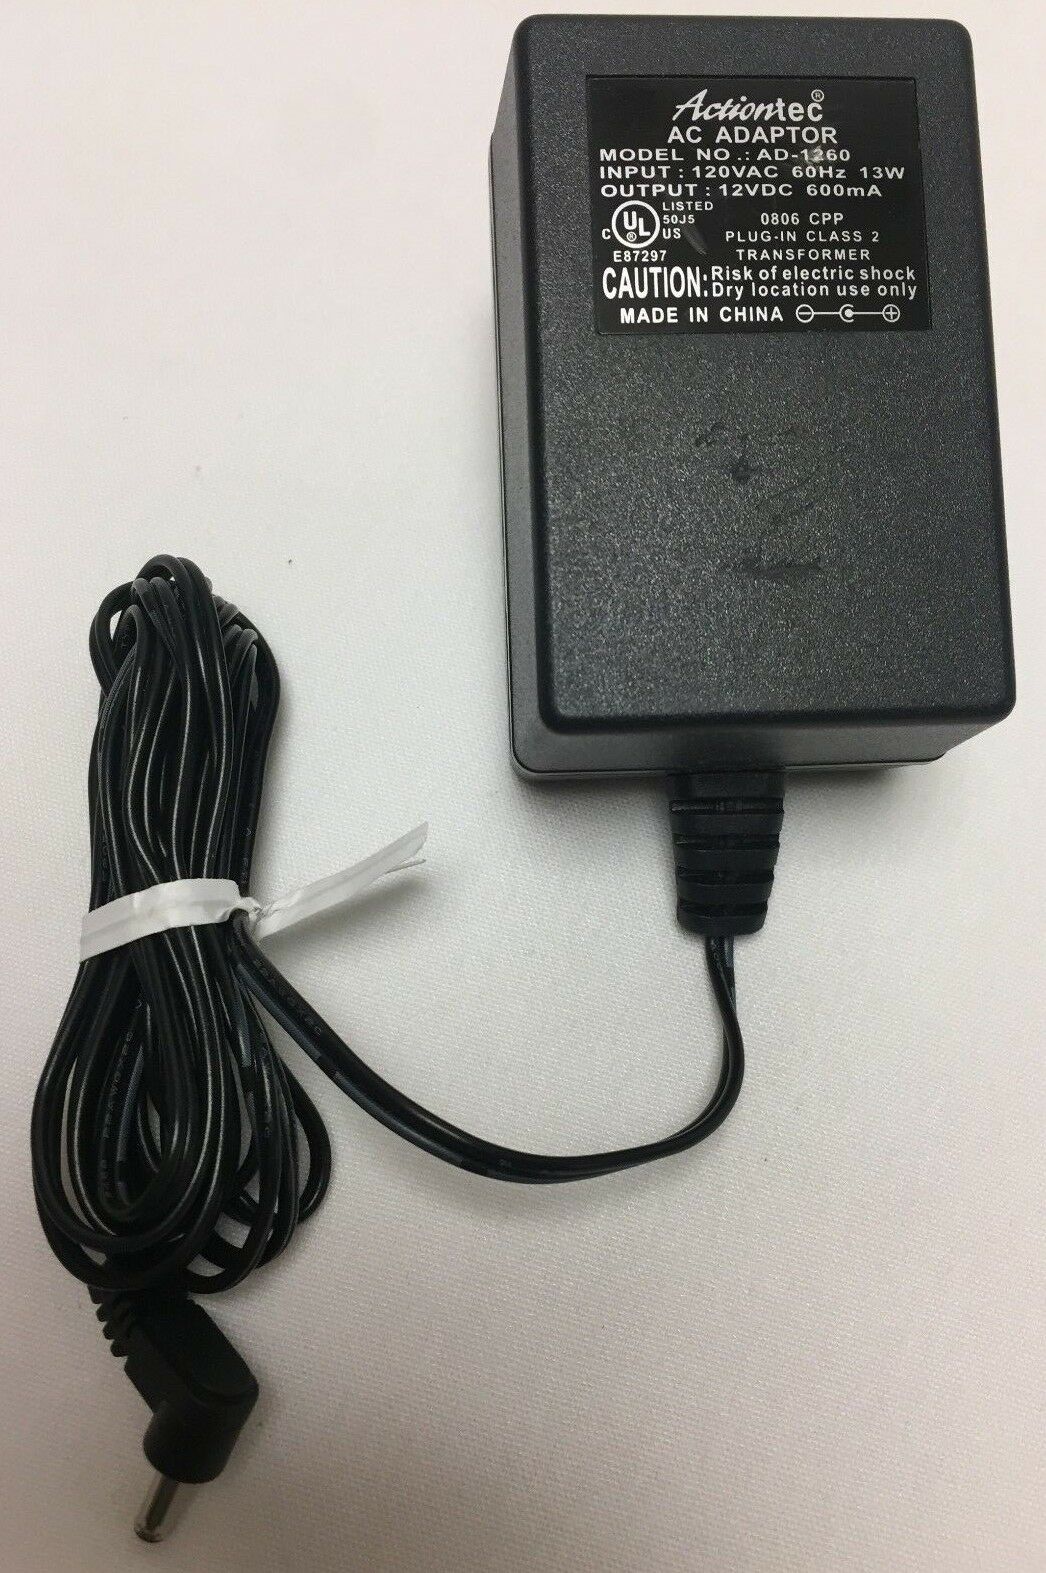 NEW Actiontec 12VDC 600mA AC Adapter AD-1260 Plug-In Class 2 Transformer